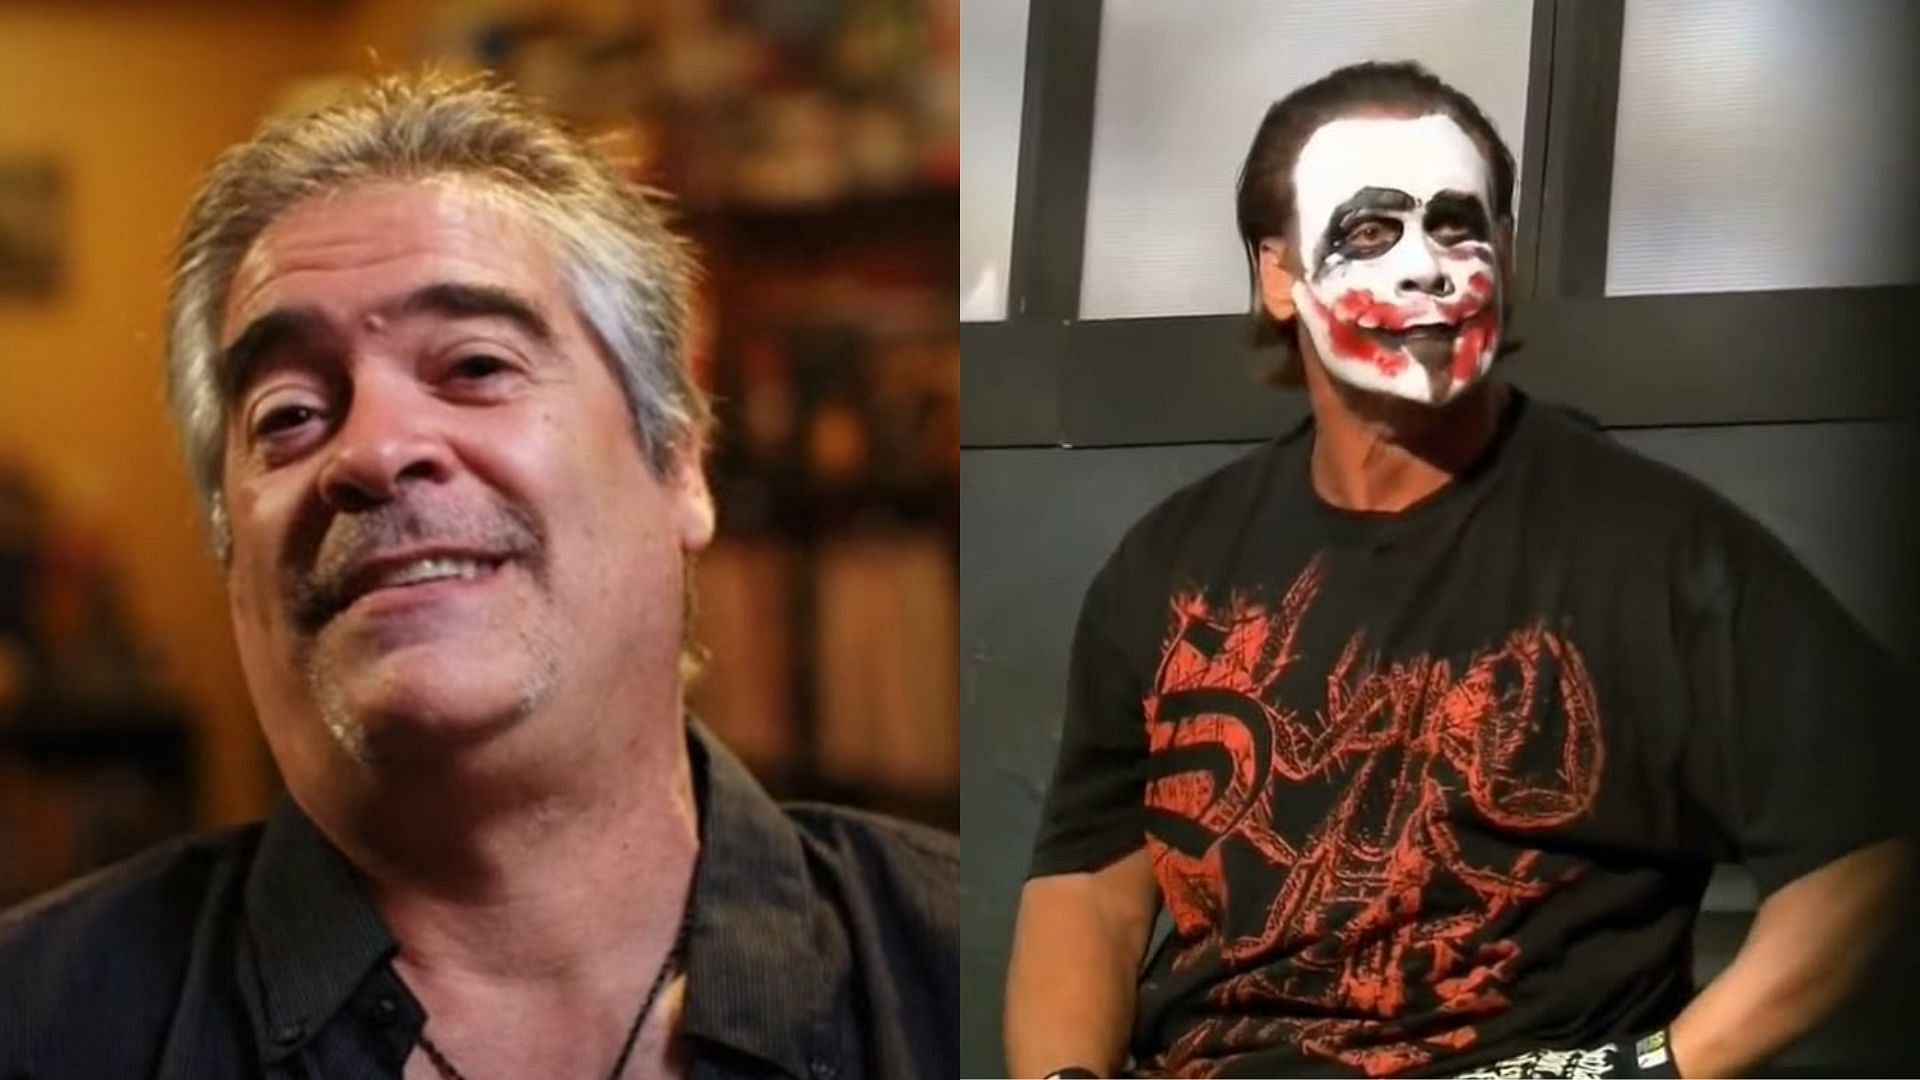 Is Vince Russo happy about Joker Sting